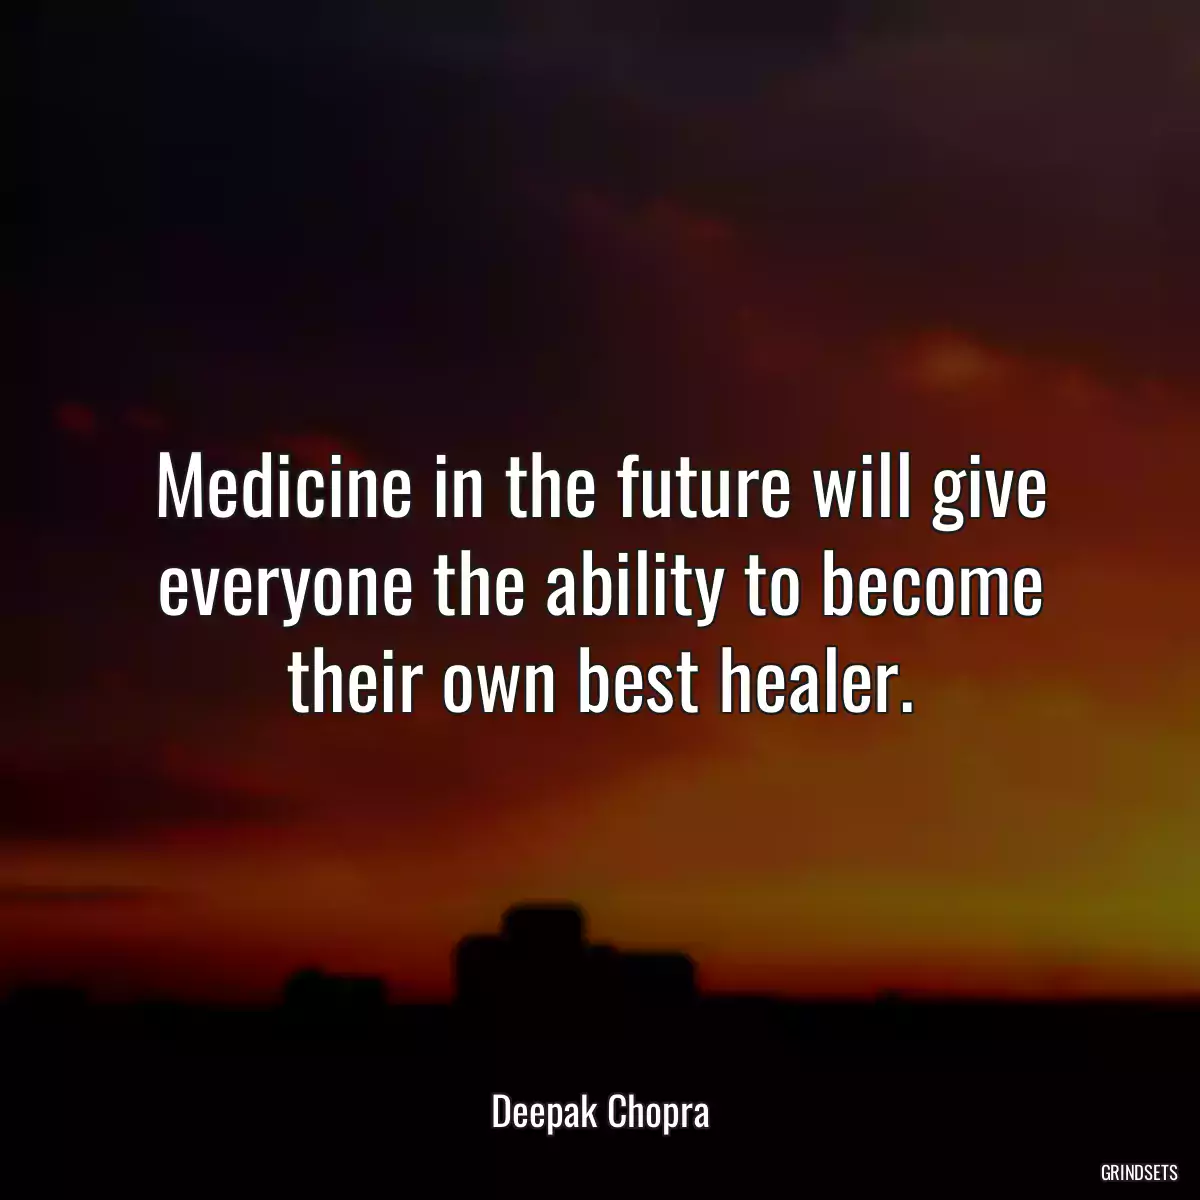 Medicine in the future will give everyone the ability to become their own best healer.